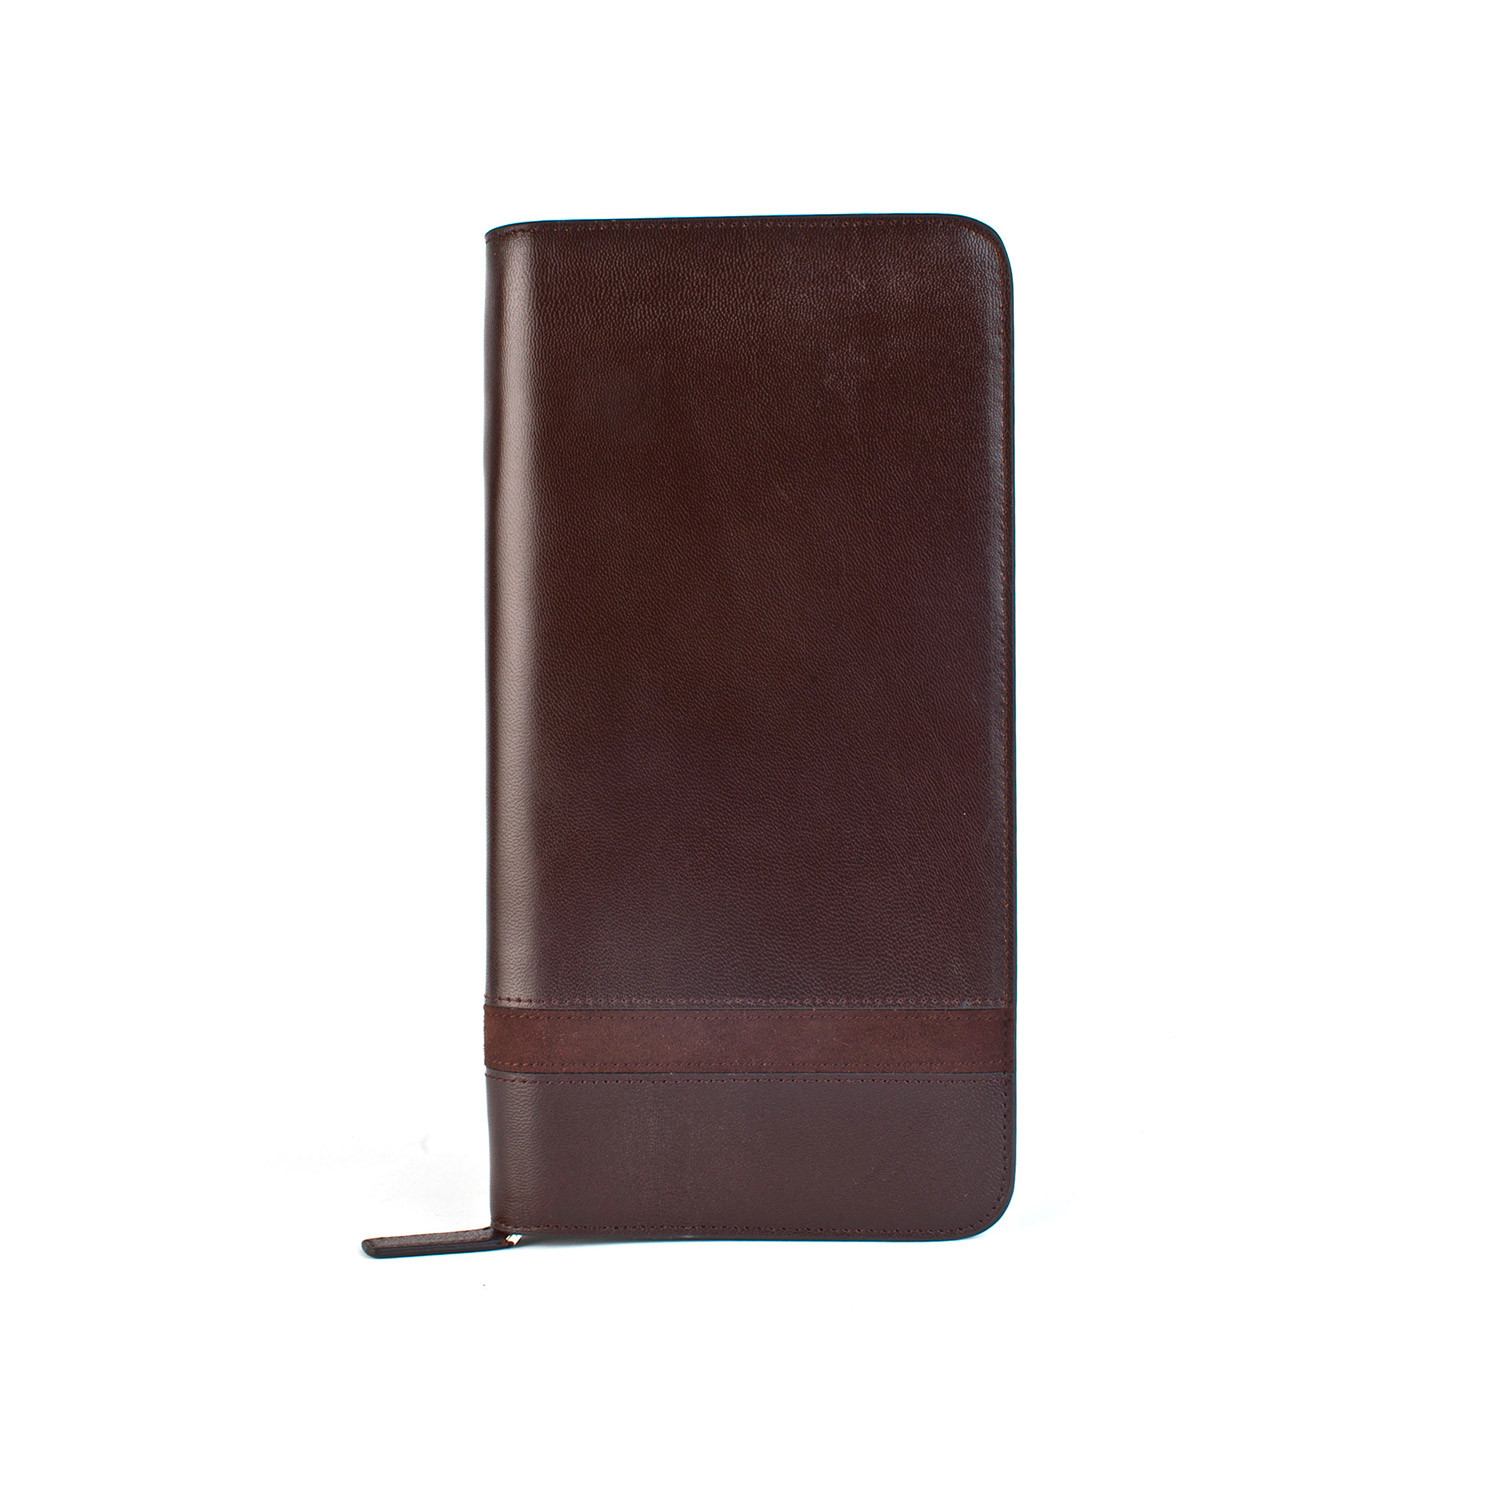 Executive Passport Holder (Brown) - Avallone - Touch of Modern